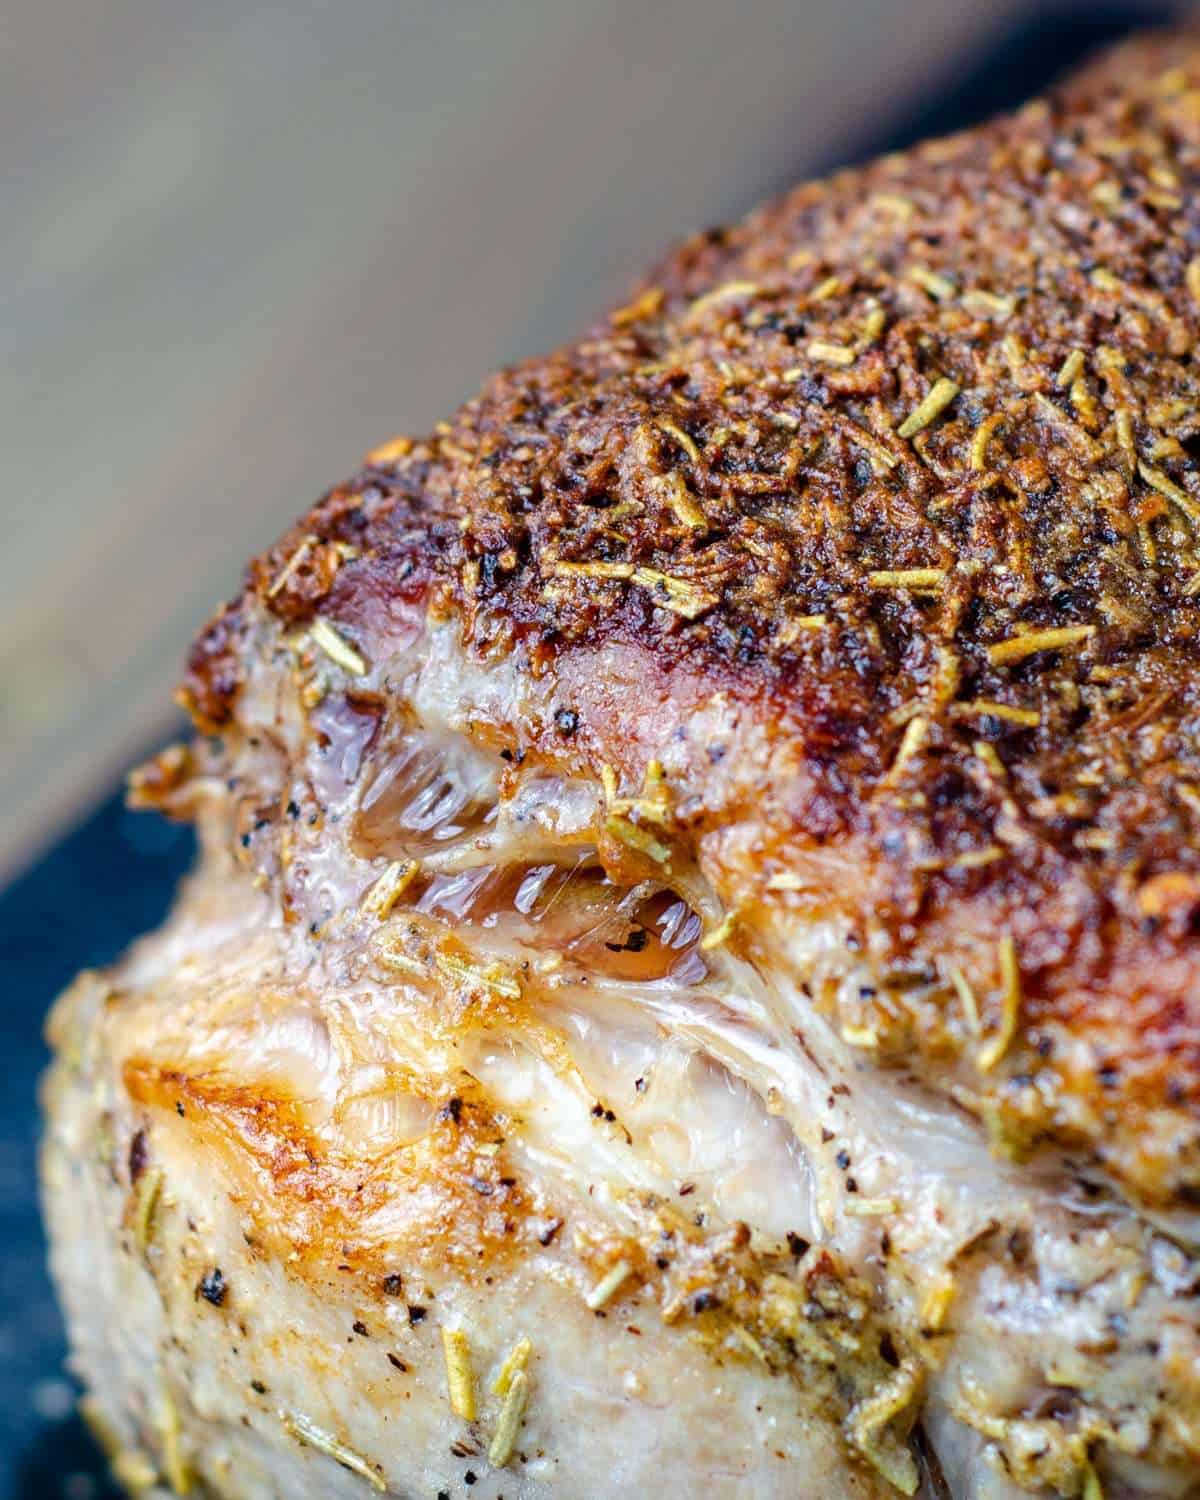 Crispy flavourful crust from the compound butter on a bone in pork rib roast